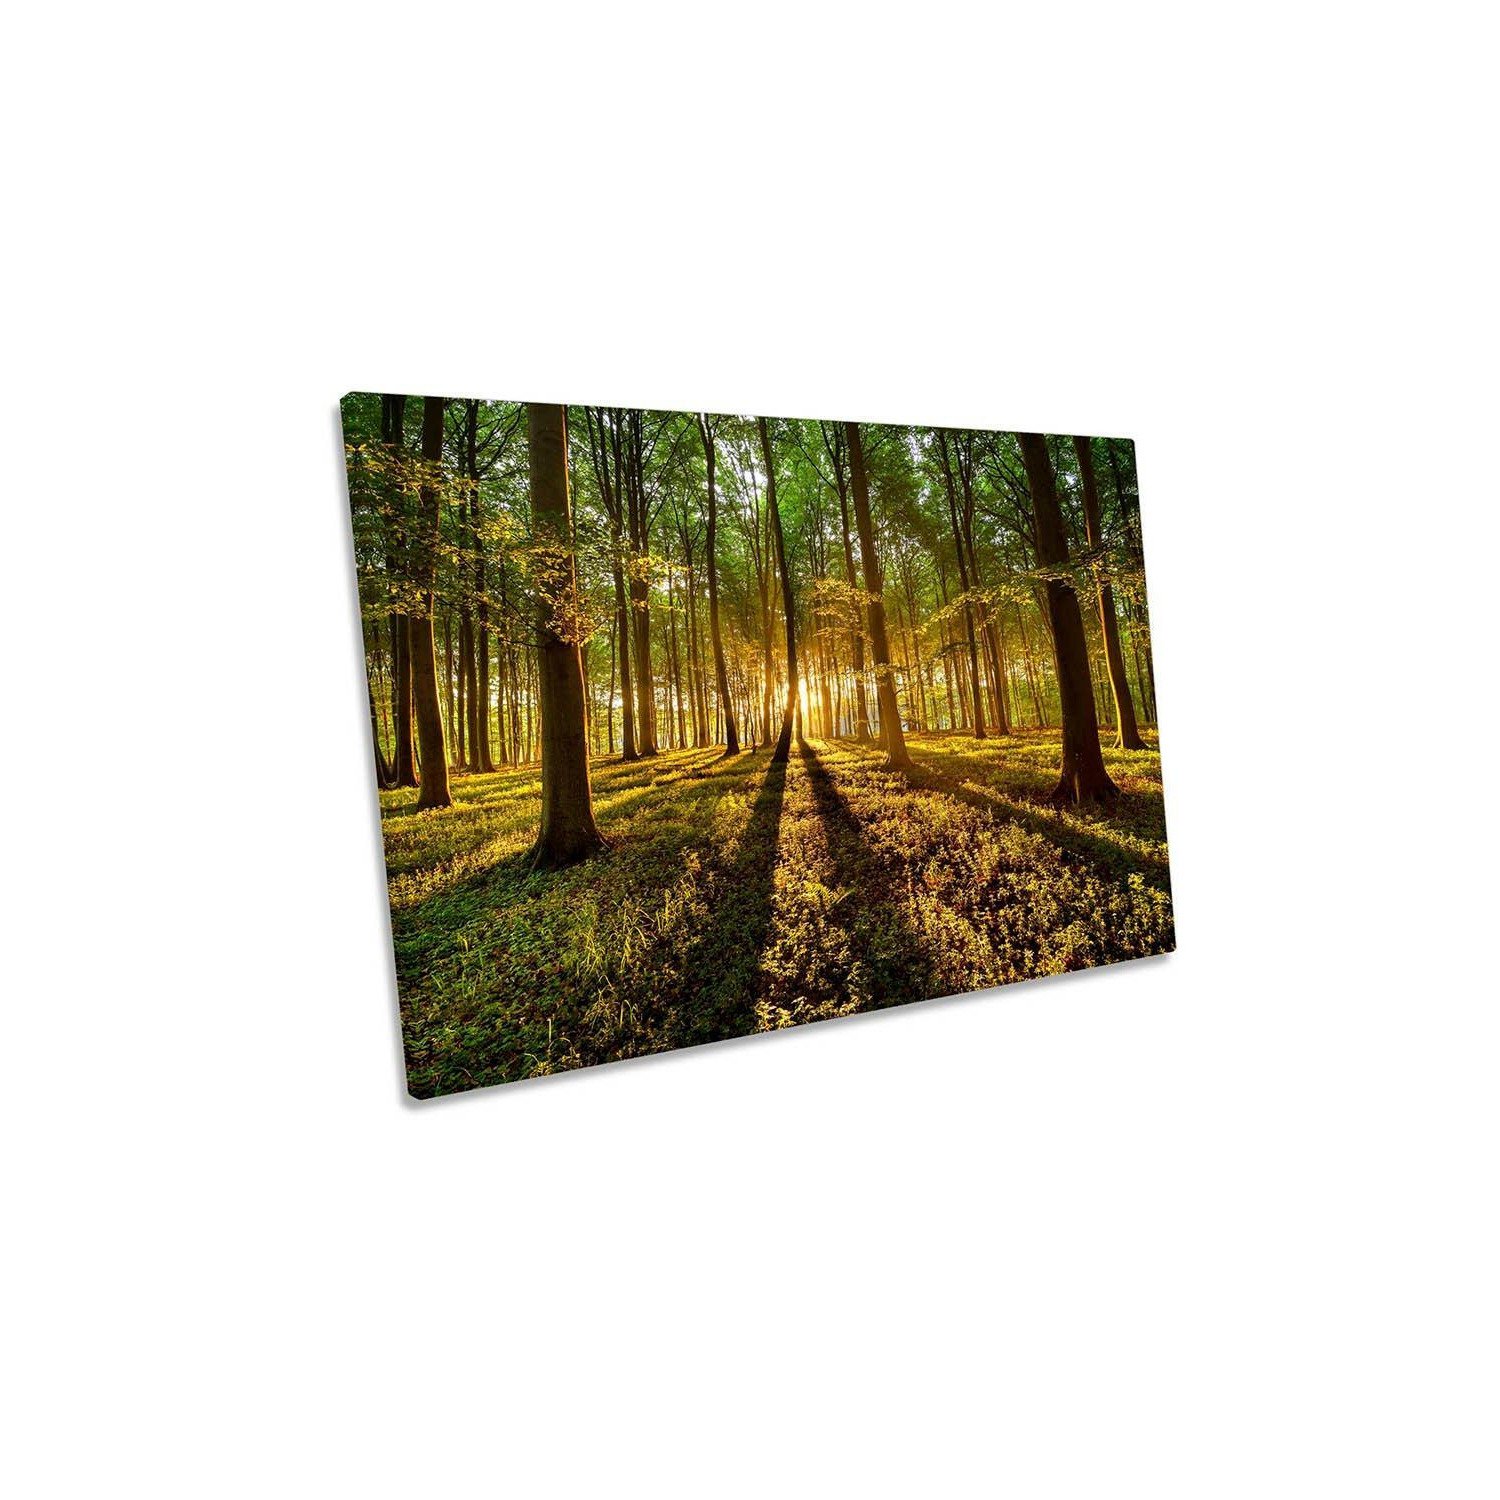 Forest Light Landscape Green Sunlight Canvas Wall Art Picture Print - image 1